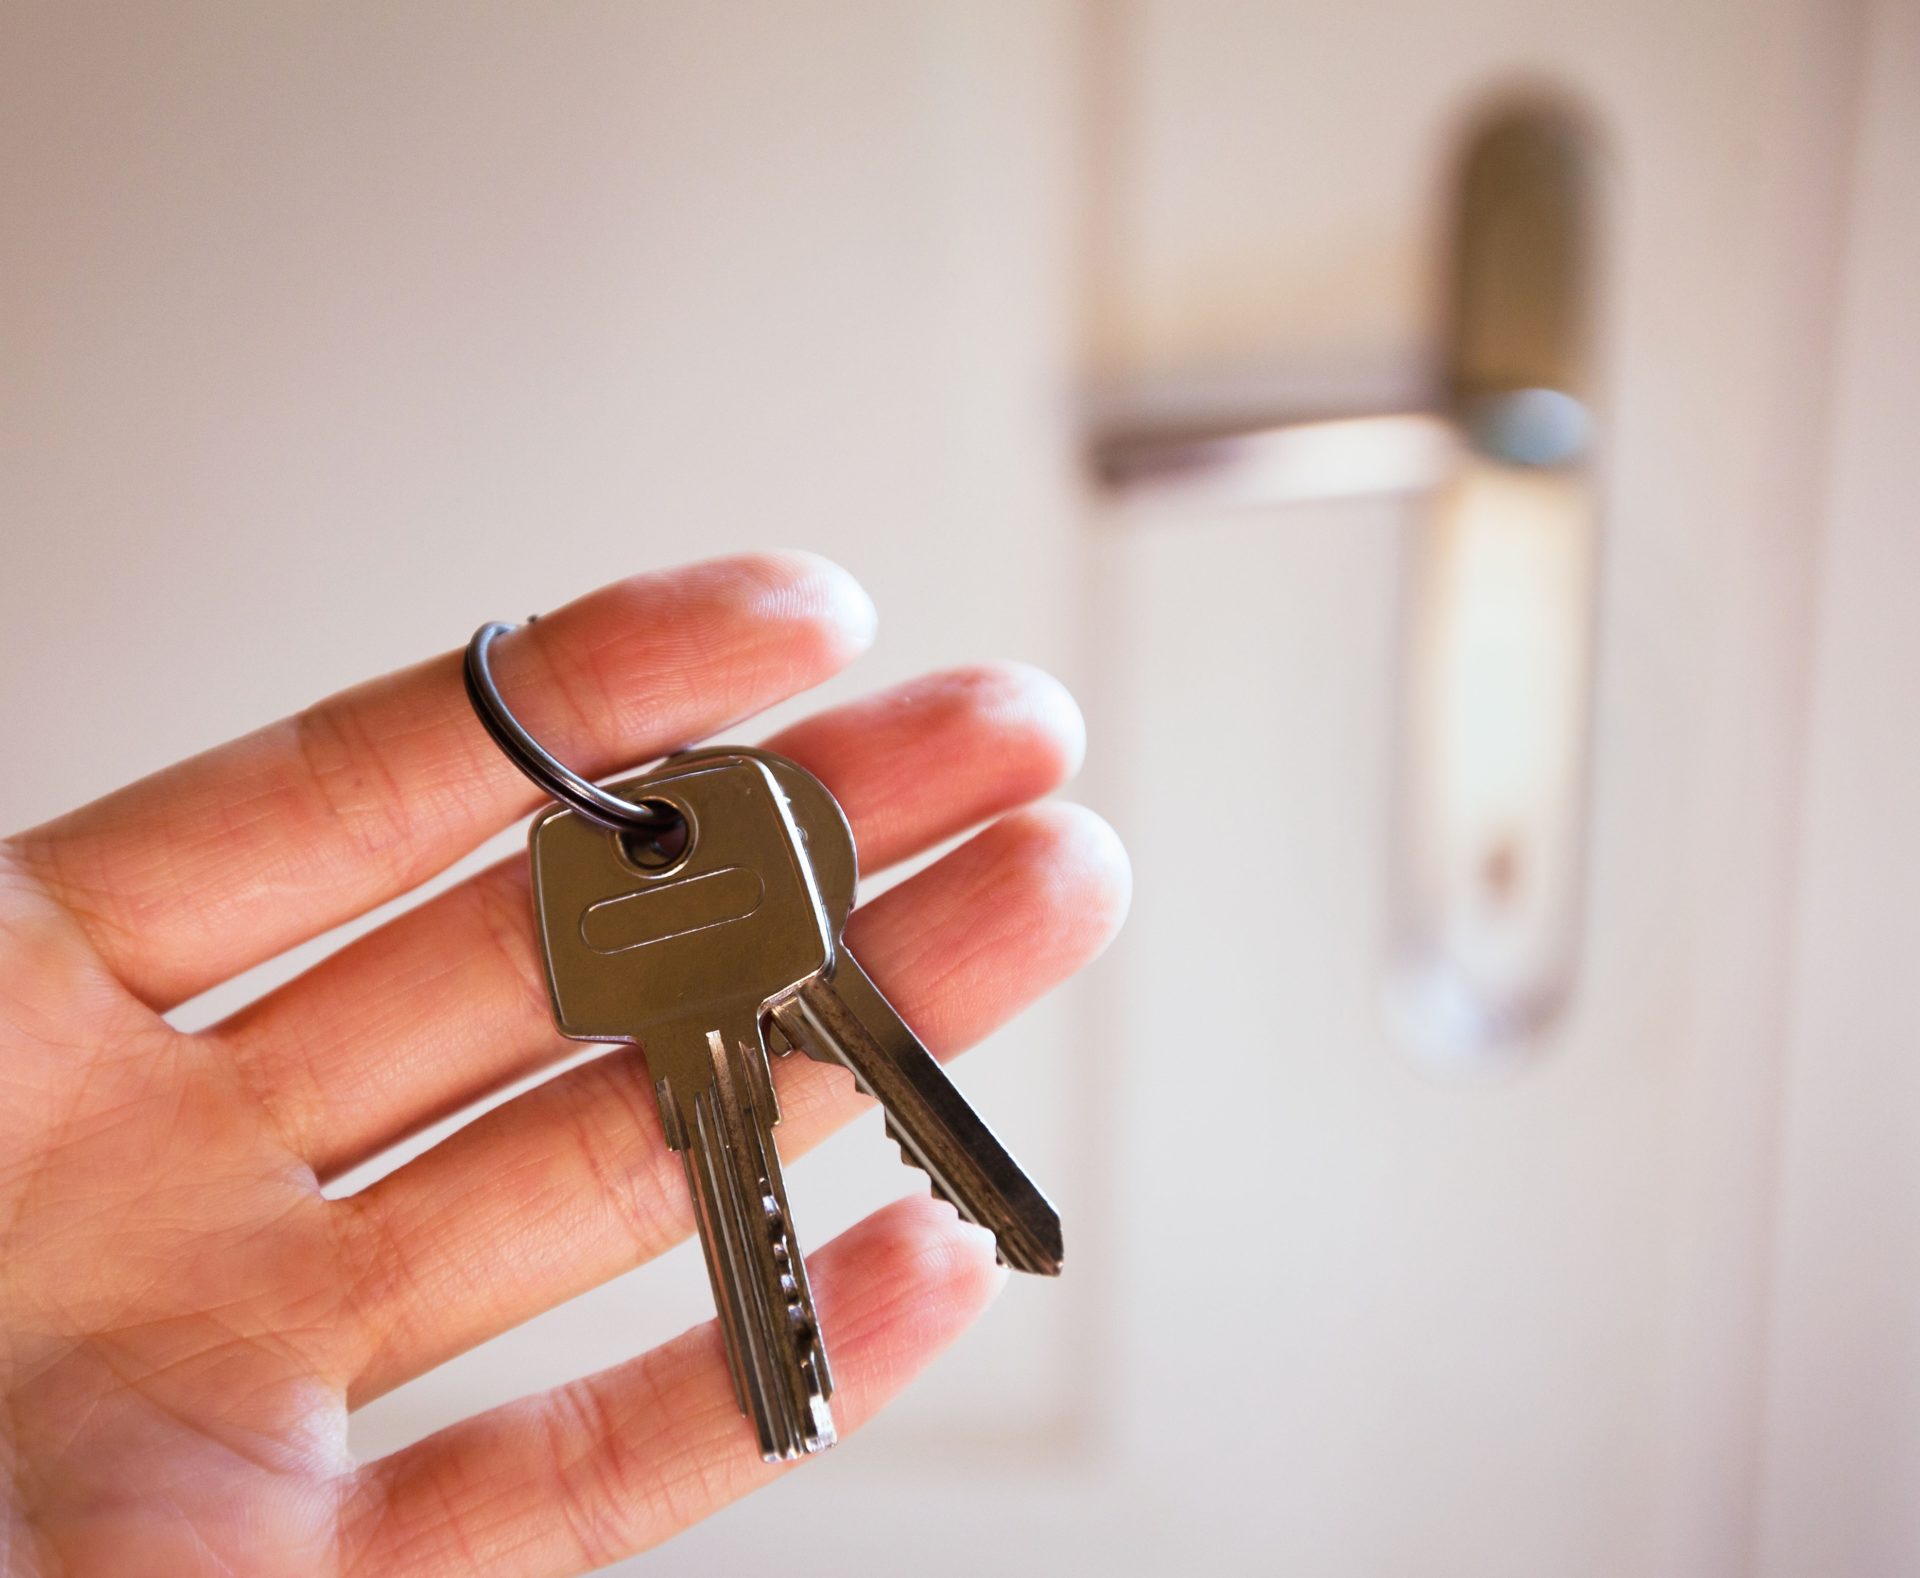 A person at an apartment door with keys in their hand